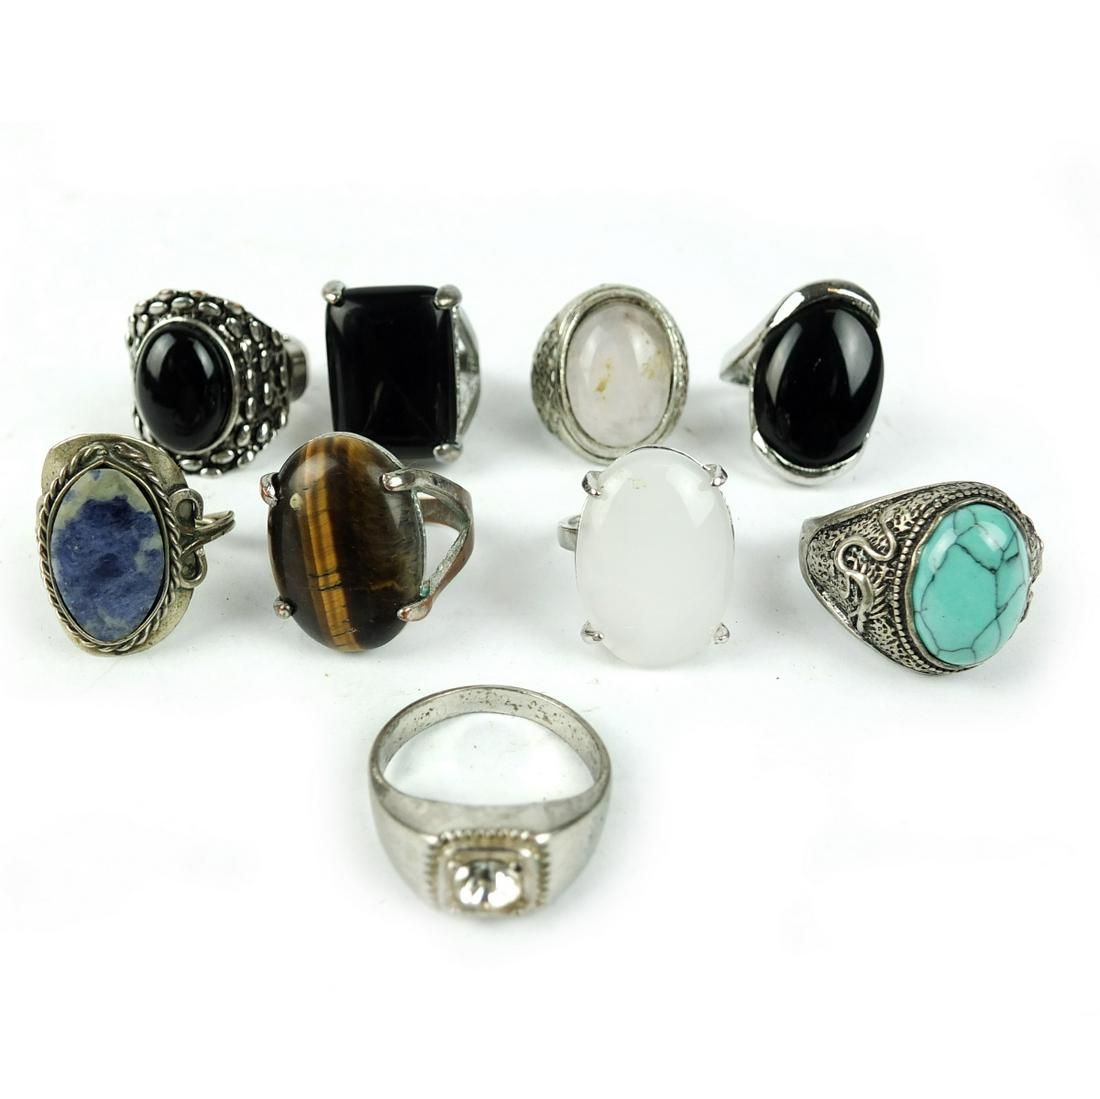 RINGSGrouping of Nine Vintage Assorted